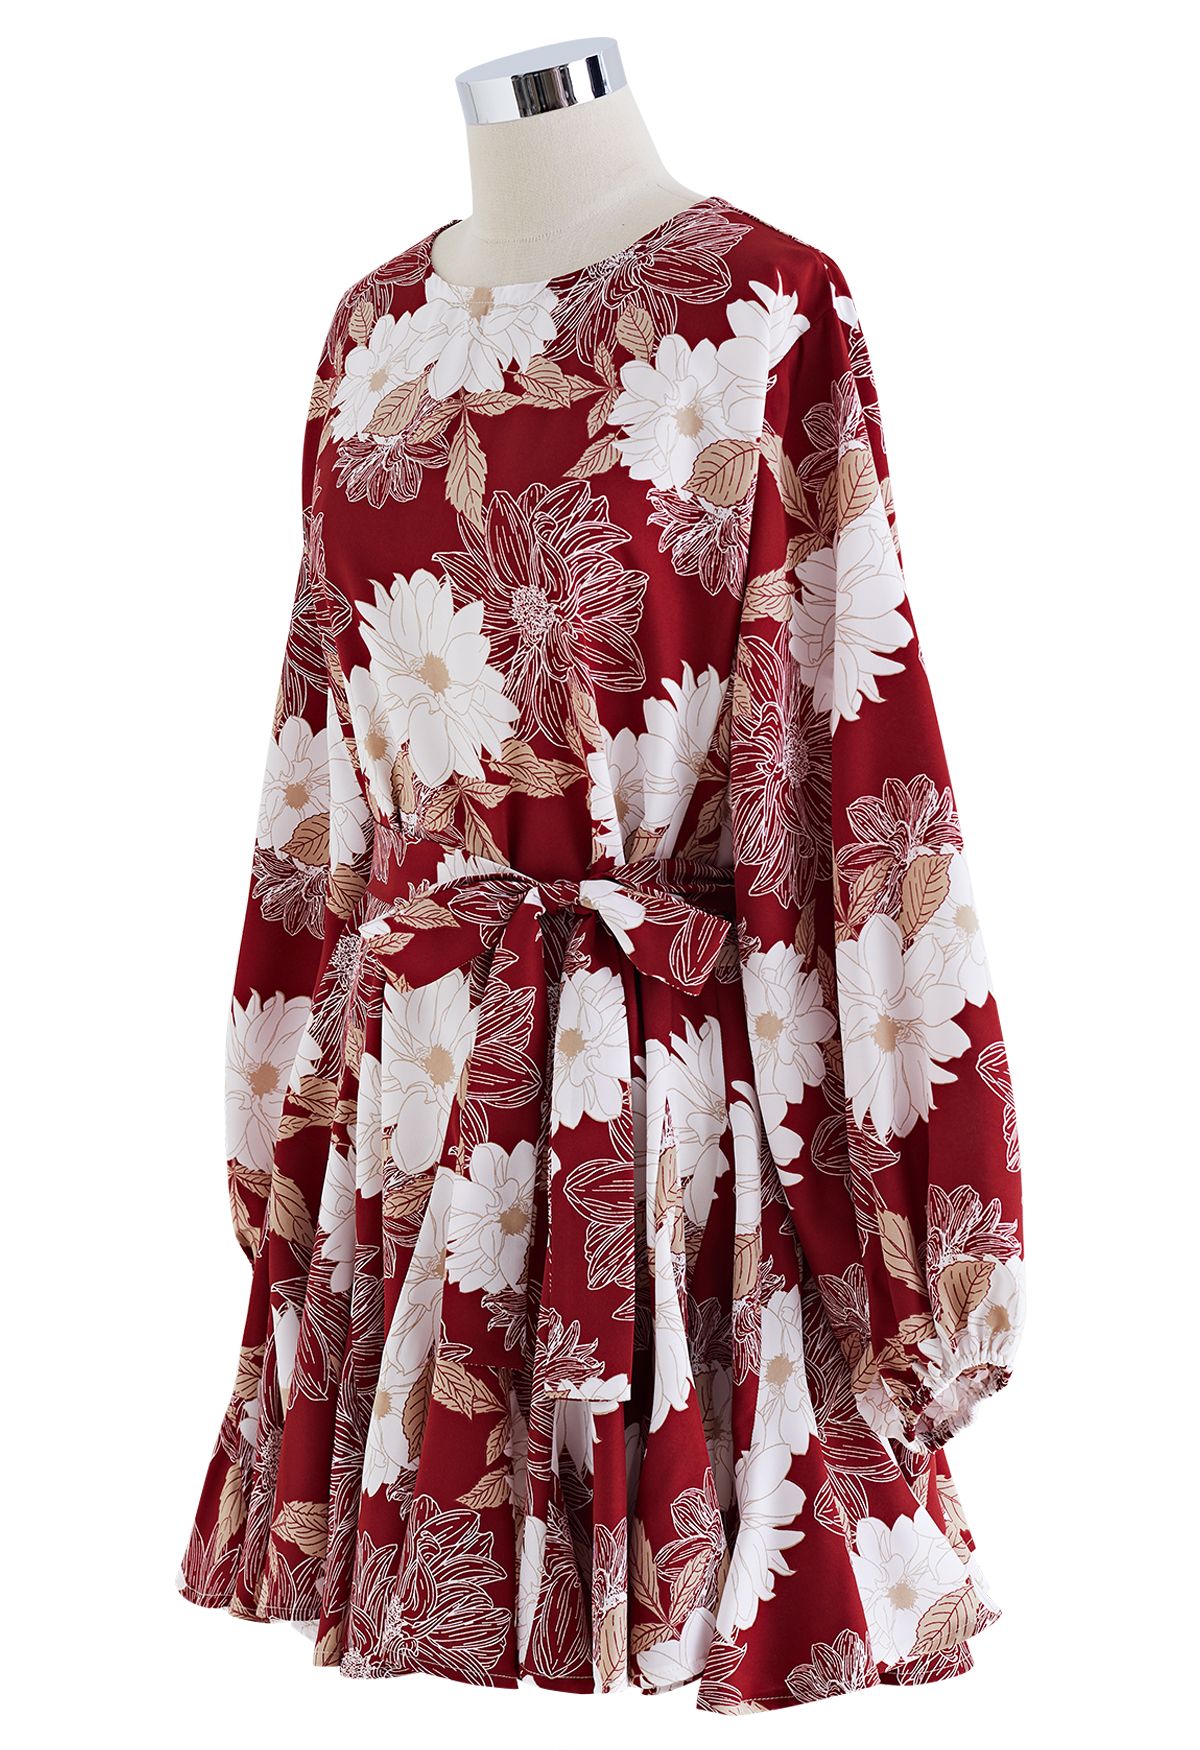 Marguerite Print Bubble Sleeves Frilling Dress in Red